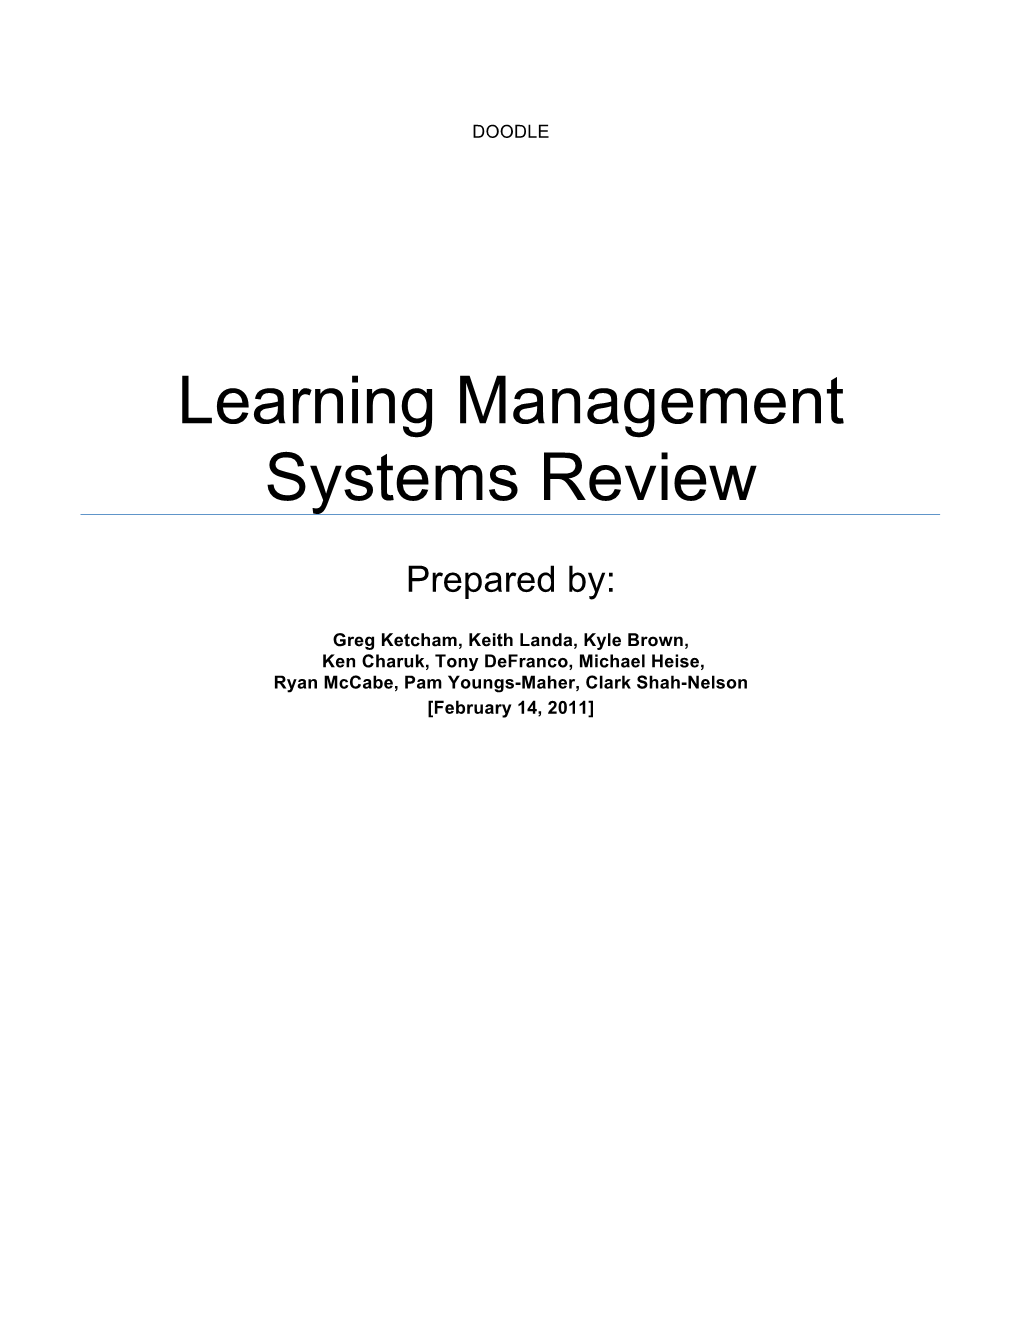 Learning Management Systems Review